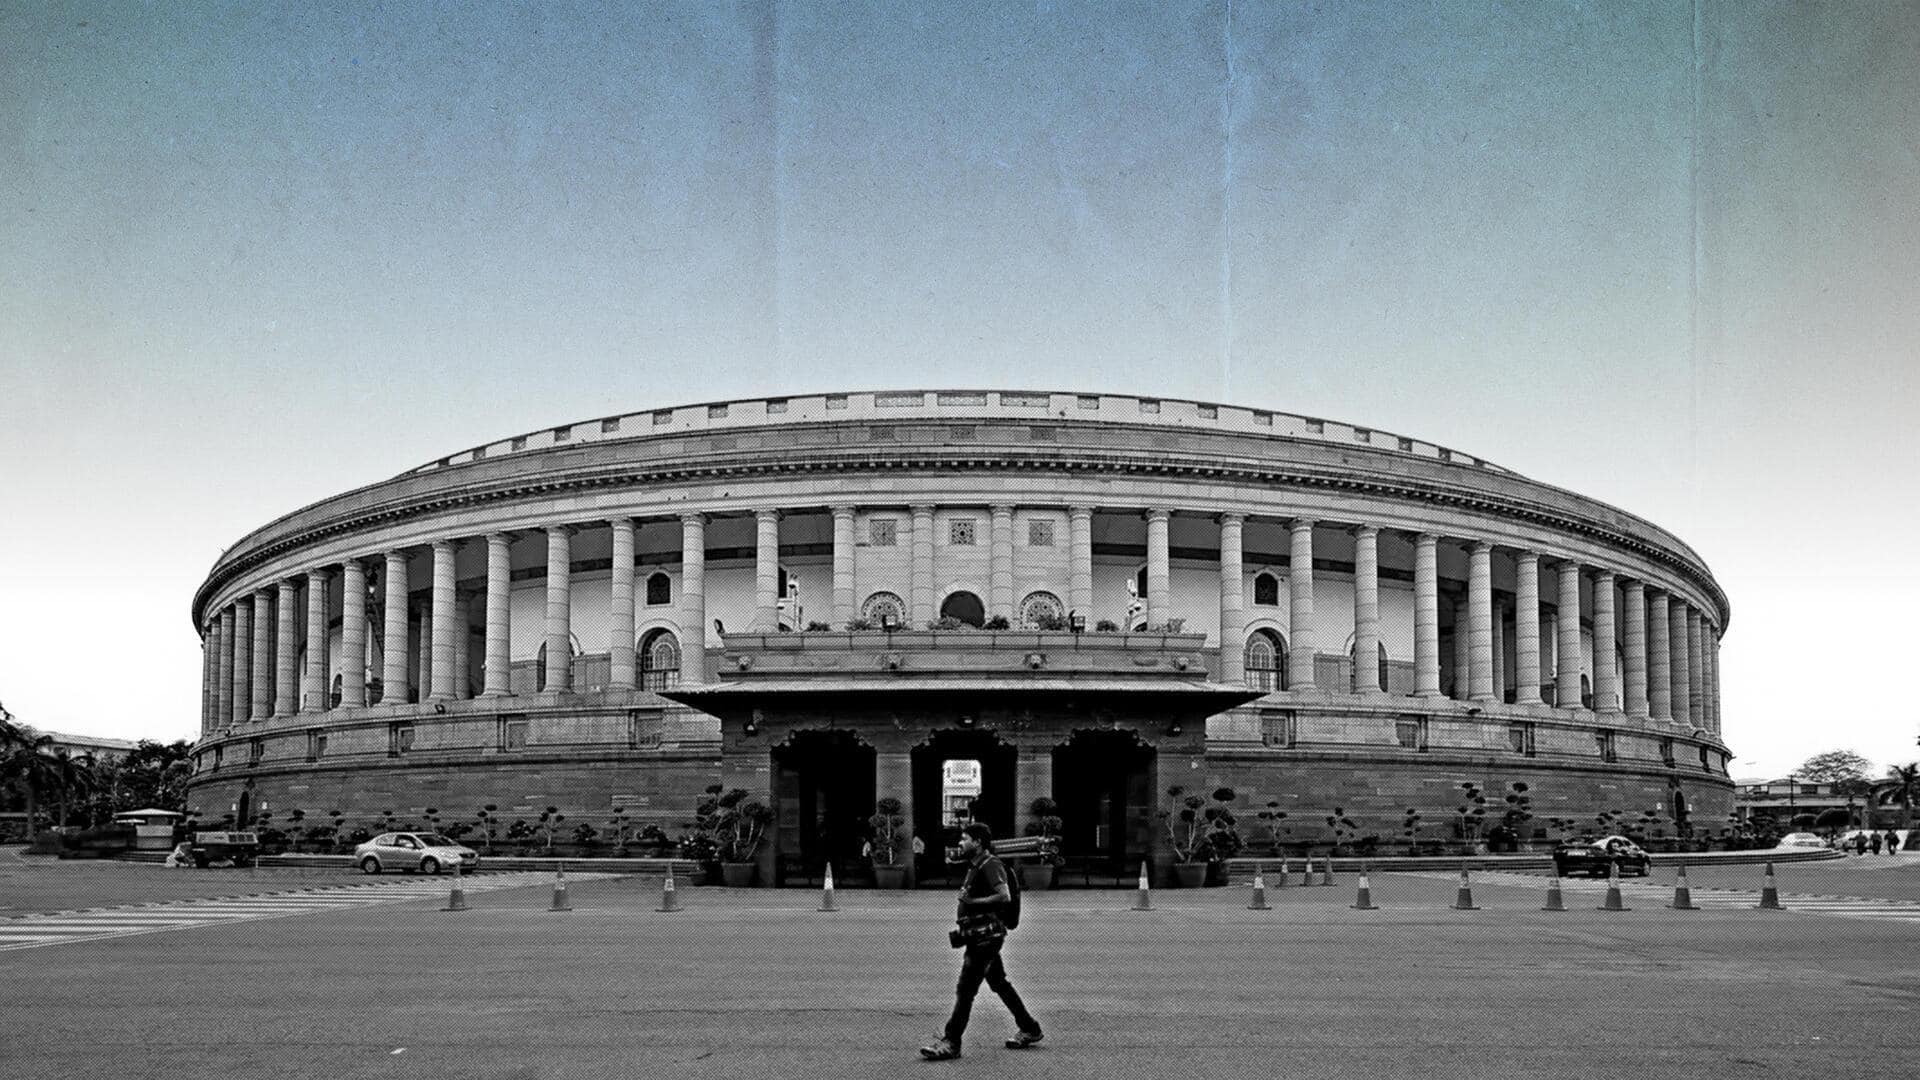 Parliament Monsoon Session: Tussle over Delhi Services Bill, Manipur likely